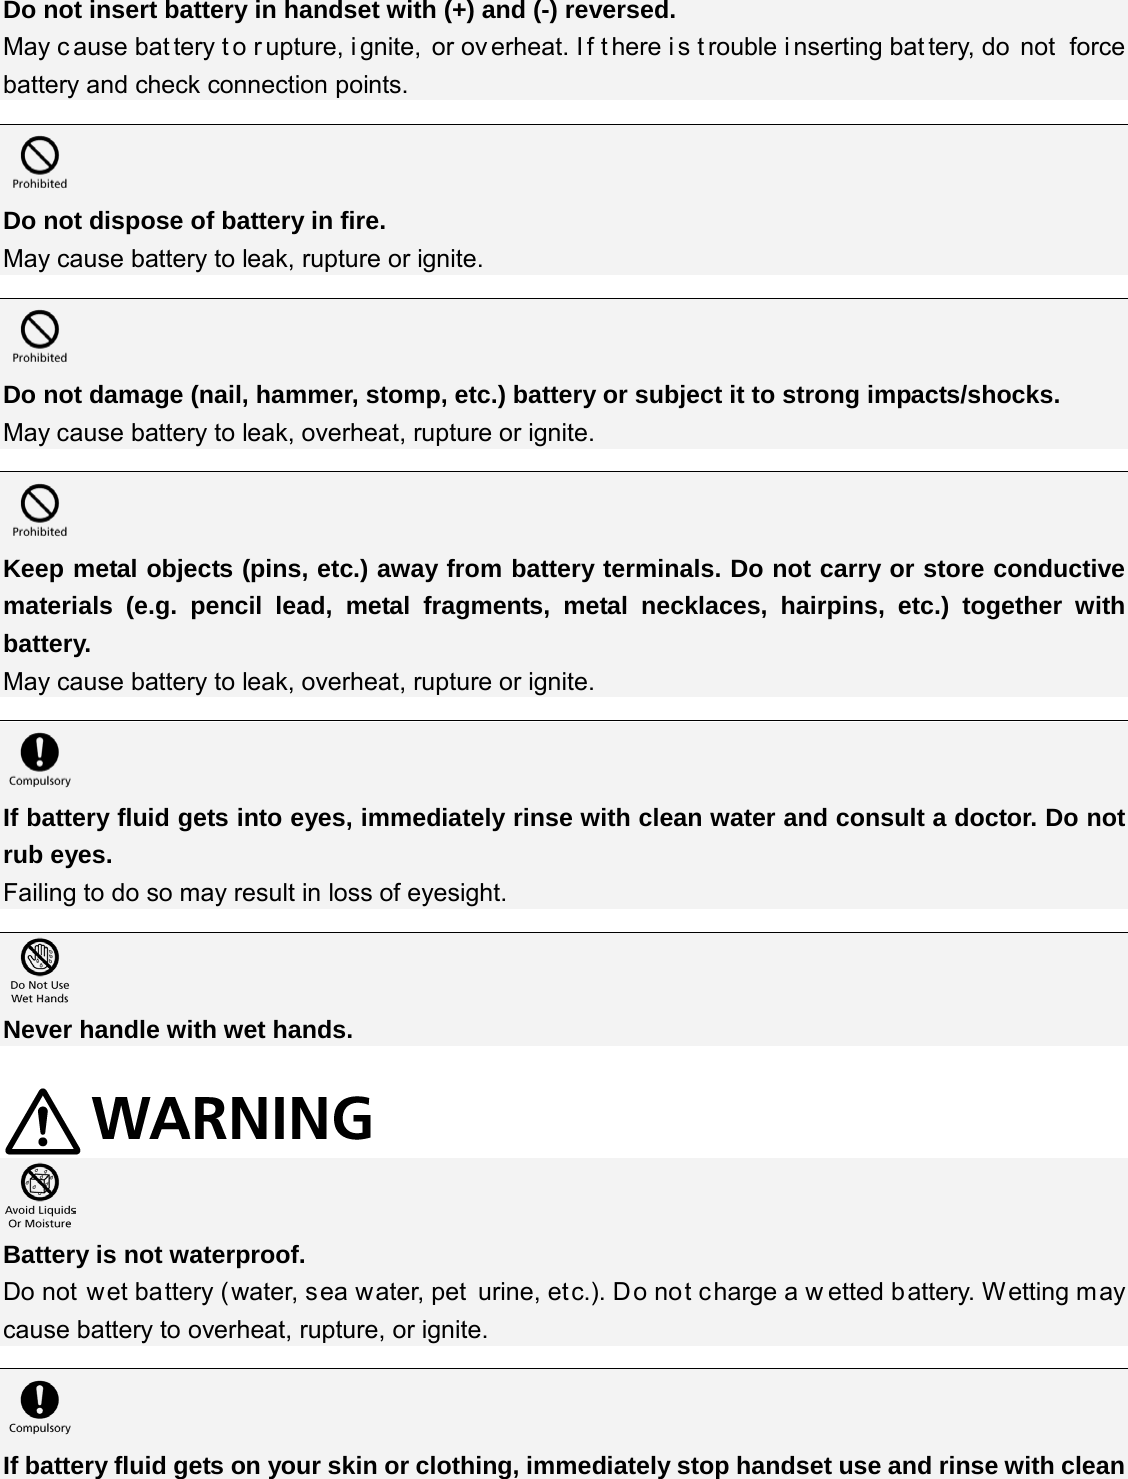 Do not insert battery in handset with (+) and (-) reversed. May c ause bat tery t o r upture, i gnite, or ov erheat. I f t here i s t rouble i nserting bat tery, do  not  force battery and check connection points.   Do not dispose of battery in fire. May cause battery to leak, rupture or ignite.   Do not damage (nail, hammer, stomp, etc.) battery or subject it to strong impacts/shocks. May cause battery to leak, overheat, rupture or ignite.   Keep metal objects (pins, etc.) away from battery terminals. Do not carry or store conductive materials (e.g. pencil lead, metal fragments, metal necklaces, hairpins, etc.) together with battery. May cause battery to leak, overheat, rupture or ignite.   If battery fluid gets into eyes, immediately rinse with clean water and consult a doctor. Do not rub eyes. Failing to do so may result in loss of eyesight.   Never handle with wet hands.    Battery is not waterproof. Do not wet battery (water, sea water, pet urine, etc.). Do not charge a w etted battery. Wetting may cause battery to overheat, rupture, or ignite.   If battery fluid gets on your skin or clothing, immediately stop handset use and rinse with clean 